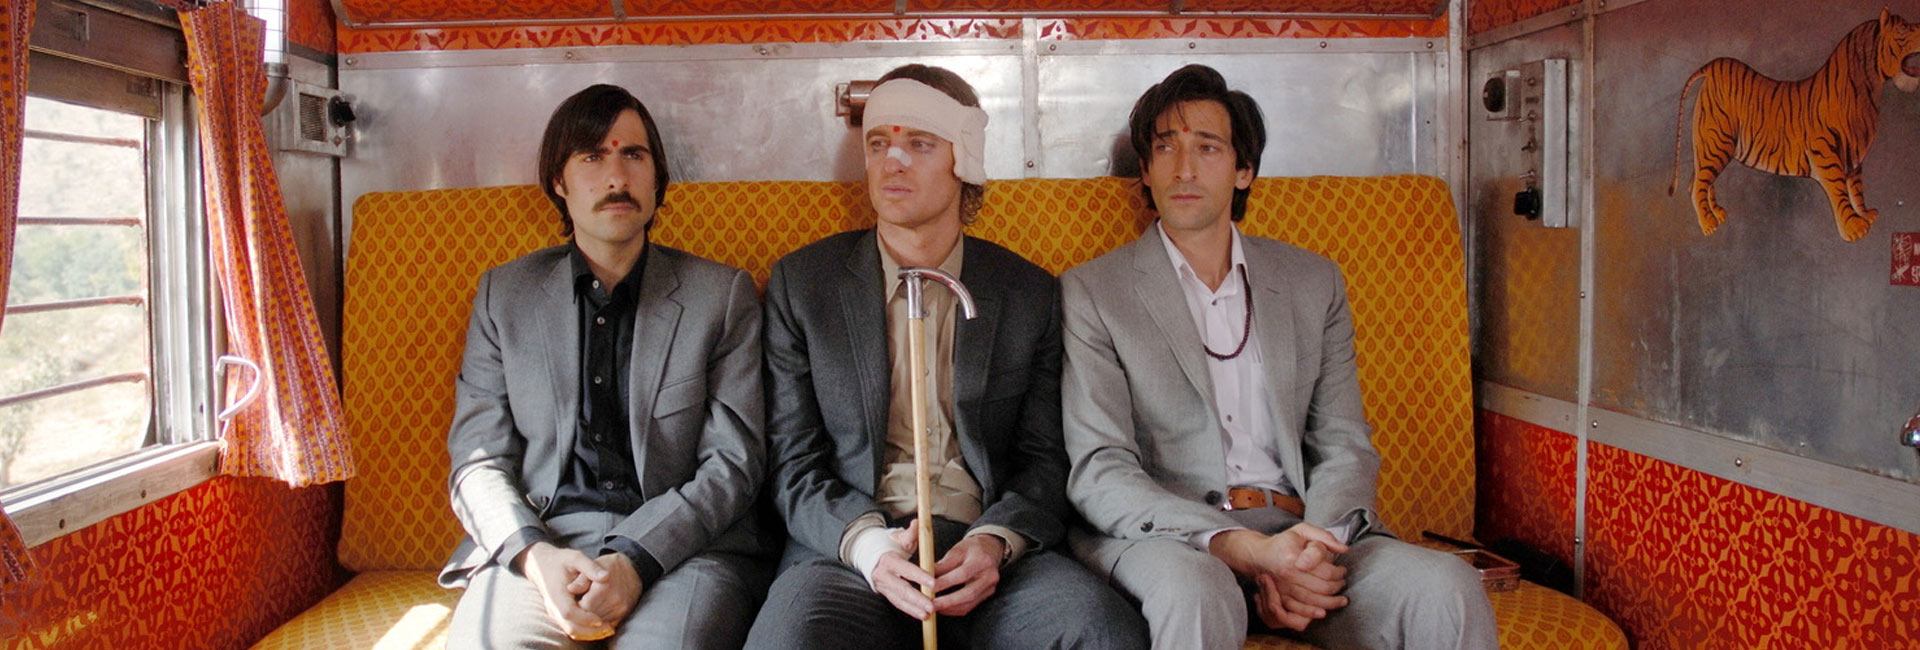 Style Tips to Steal From Wes Anderson and His Movies